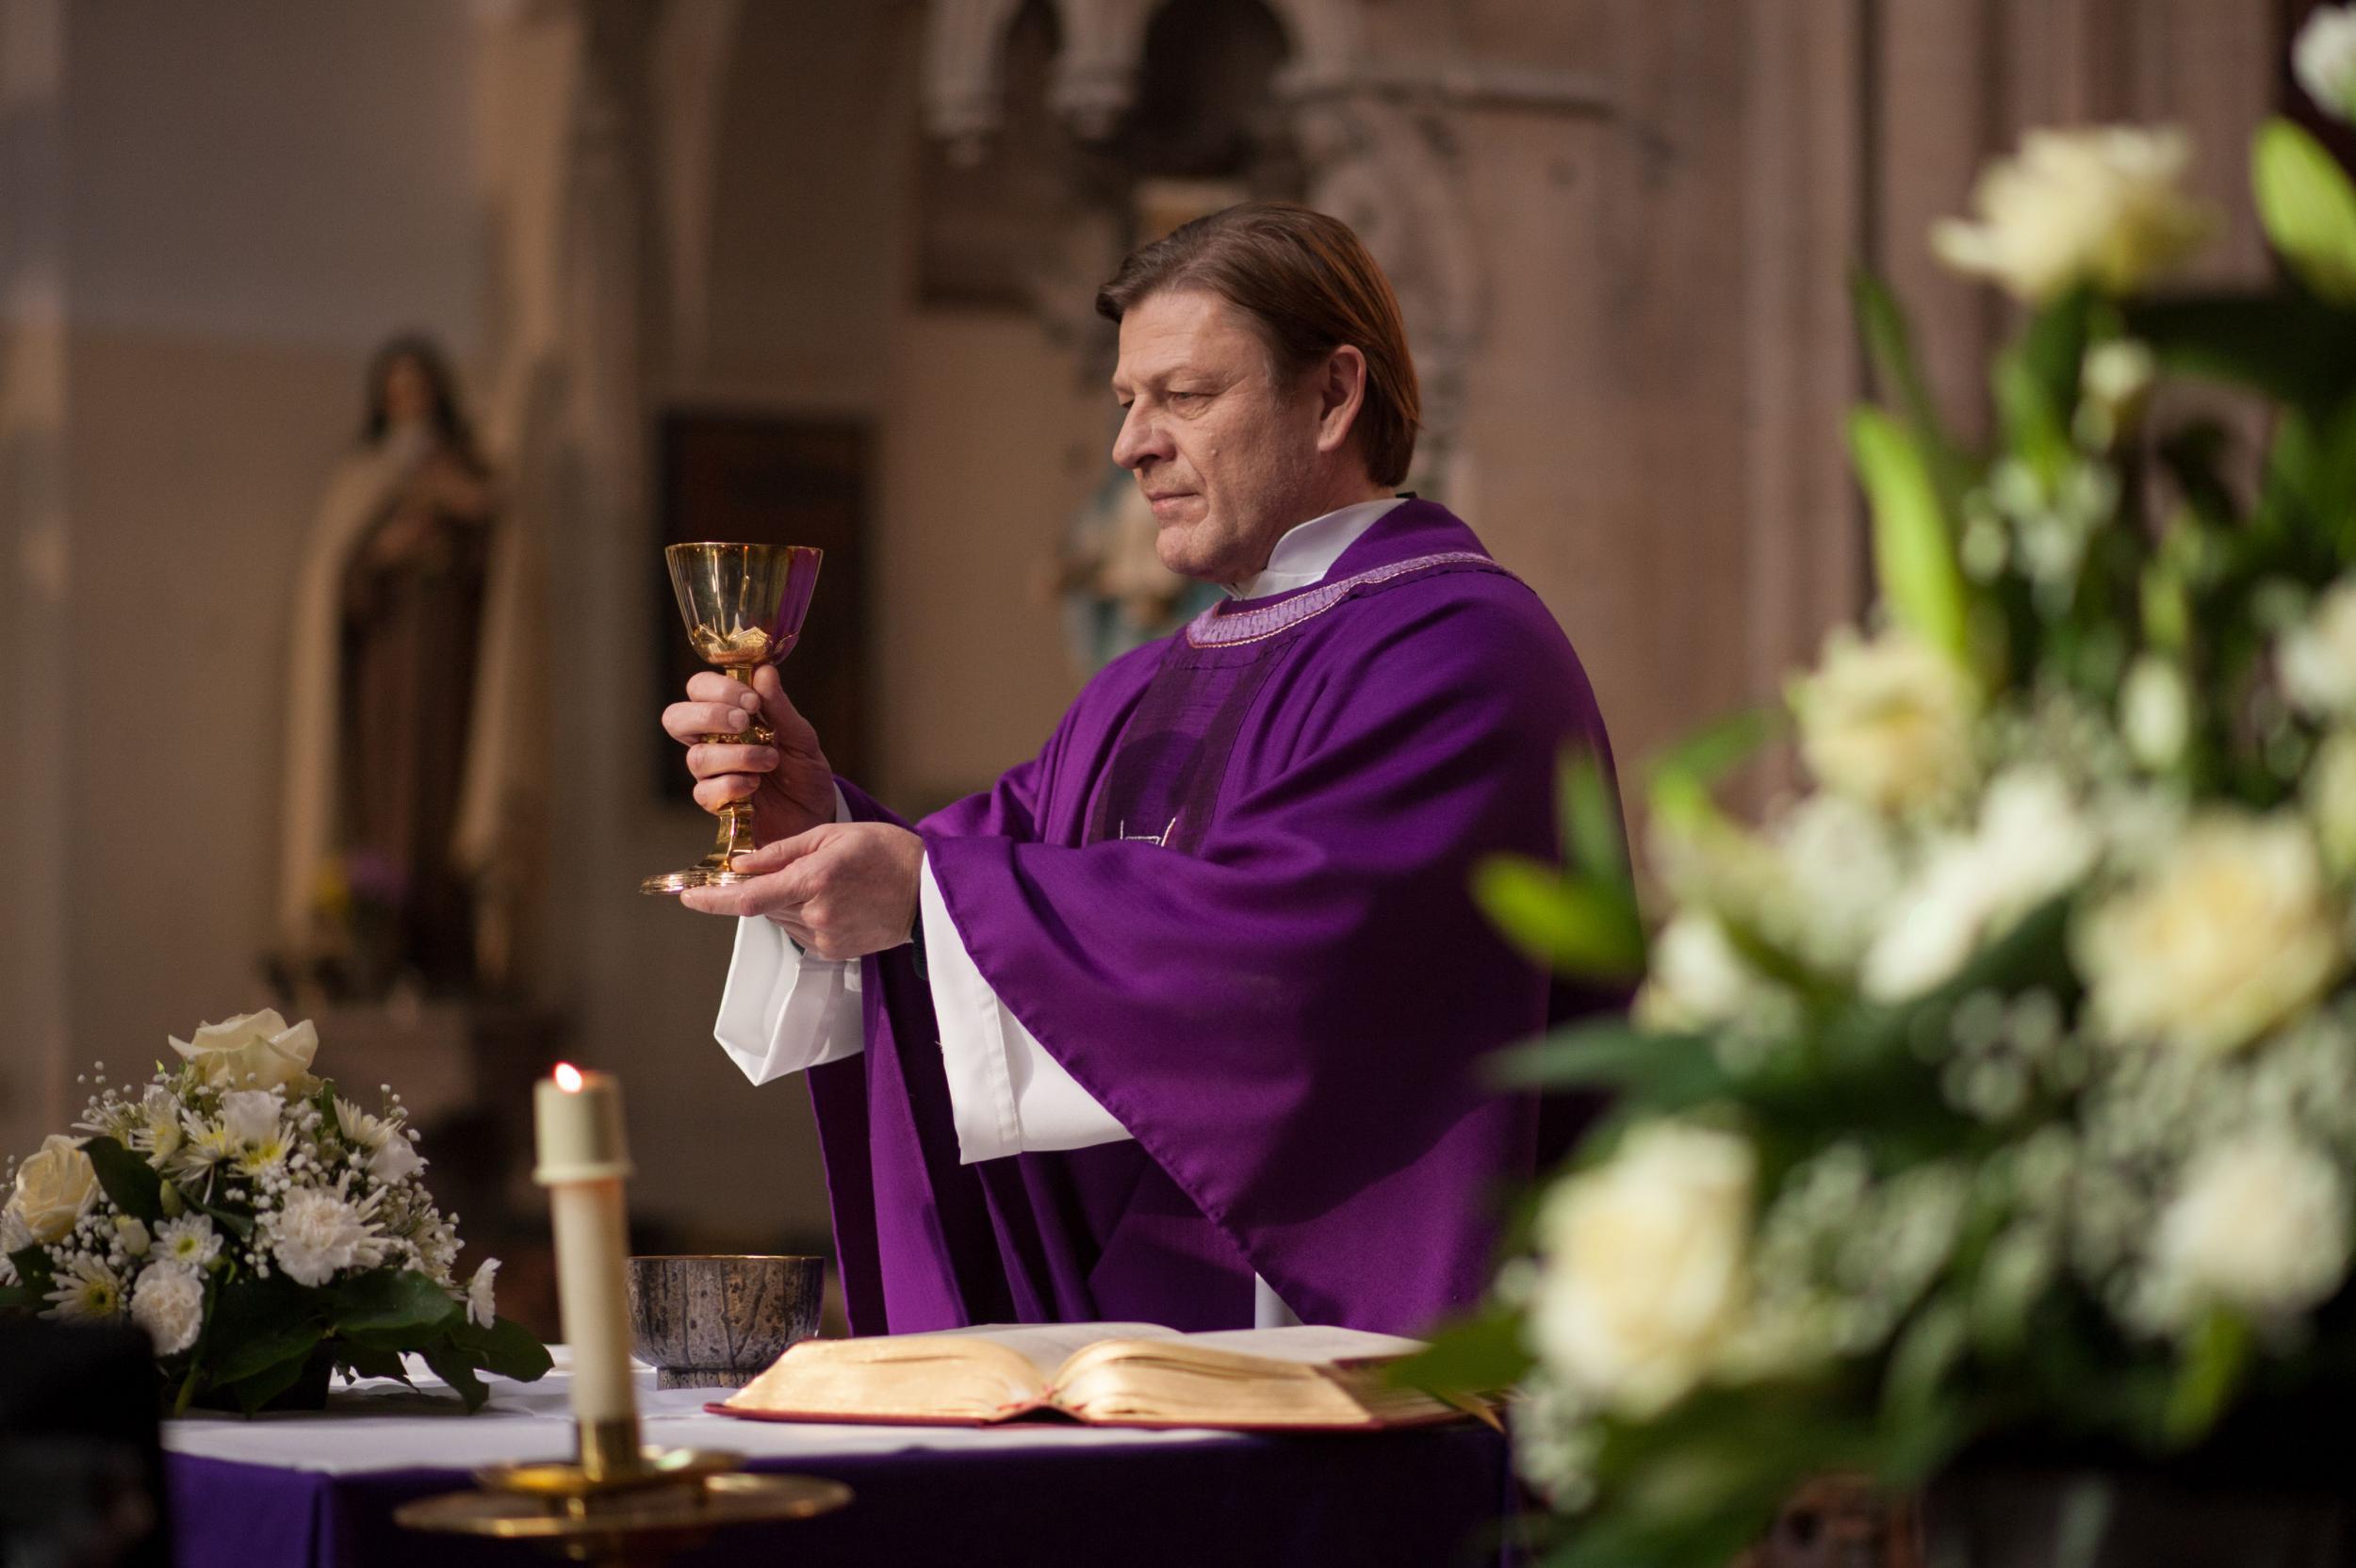 In ‘Broken’ Sean Bean plays a priest seemingly occupied 24/7 with the most appalling crimes and circumstances